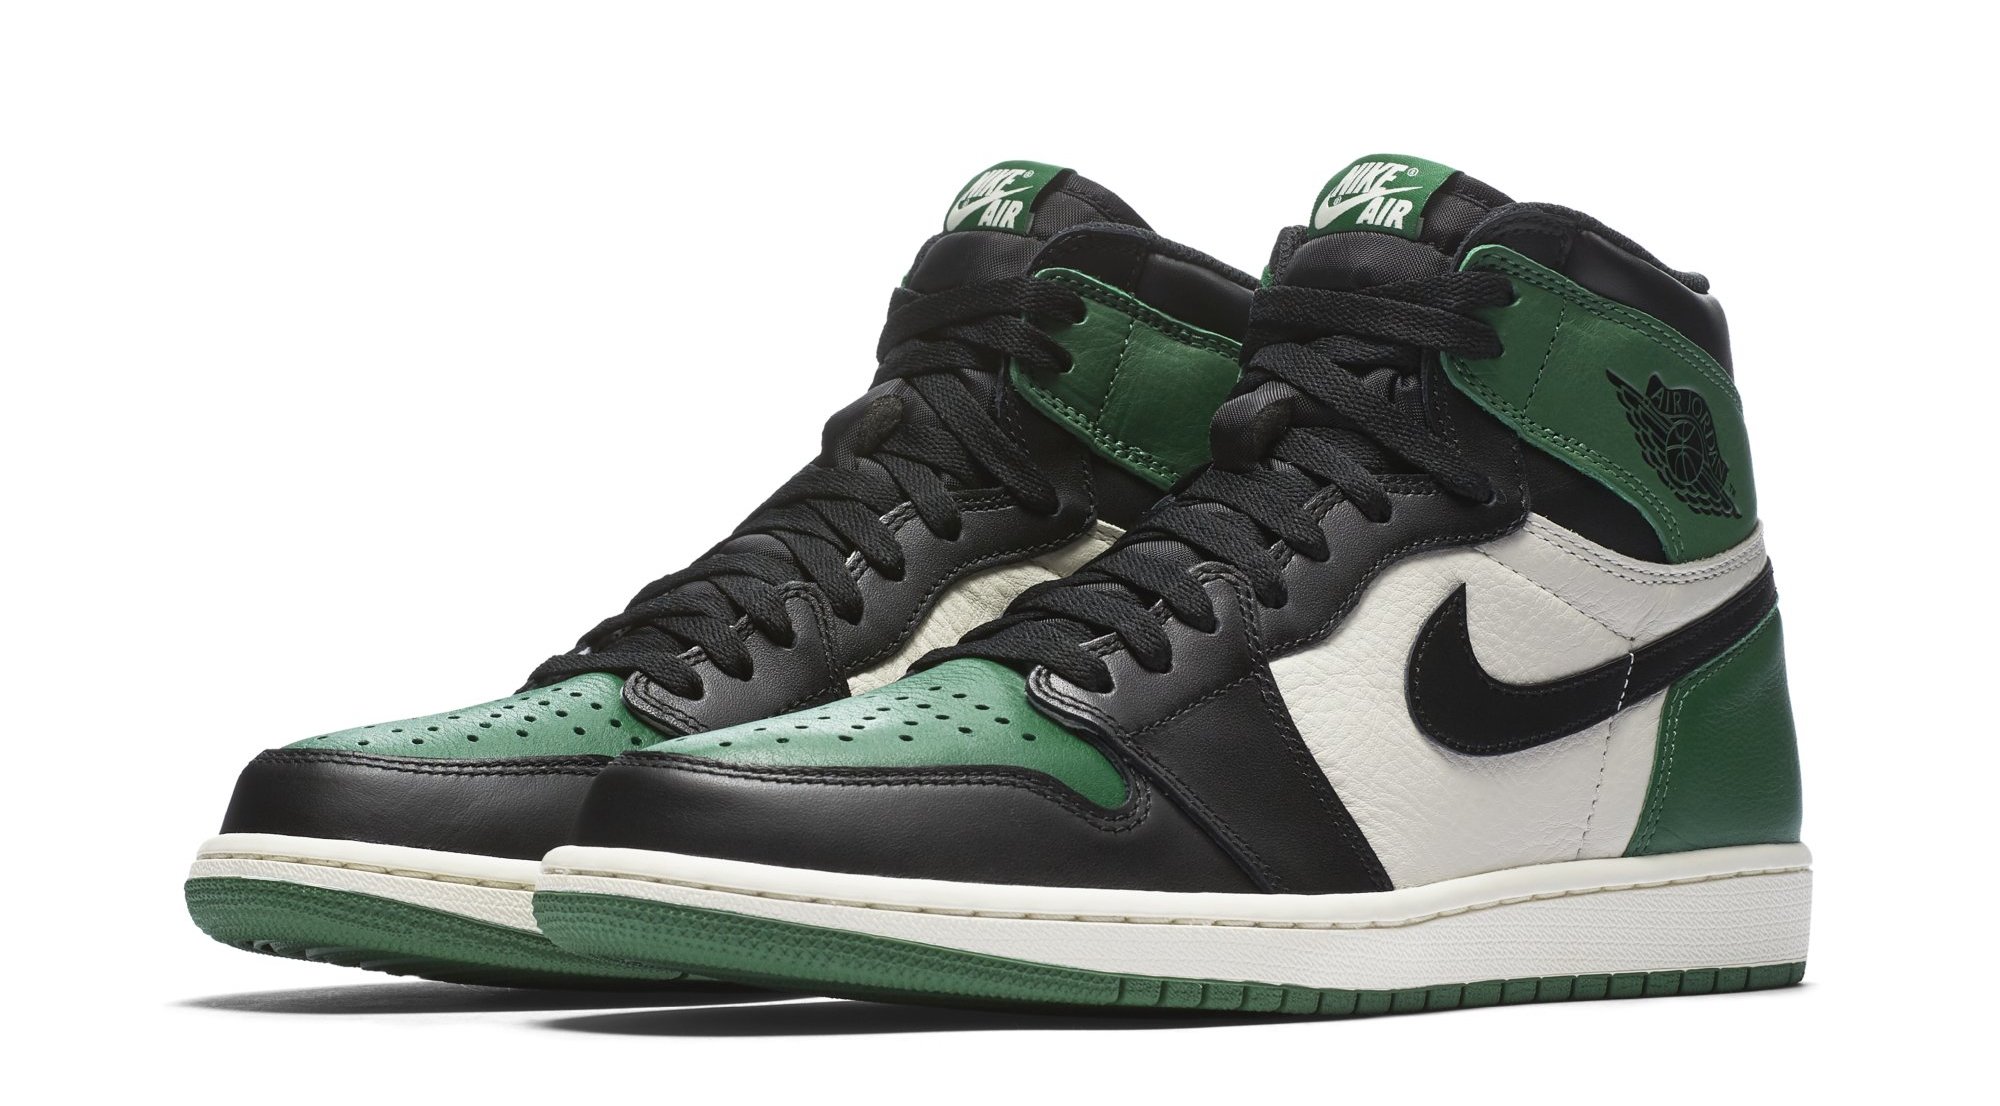 Pine Green' Air Jordan 1s Are Almost Here | Complex